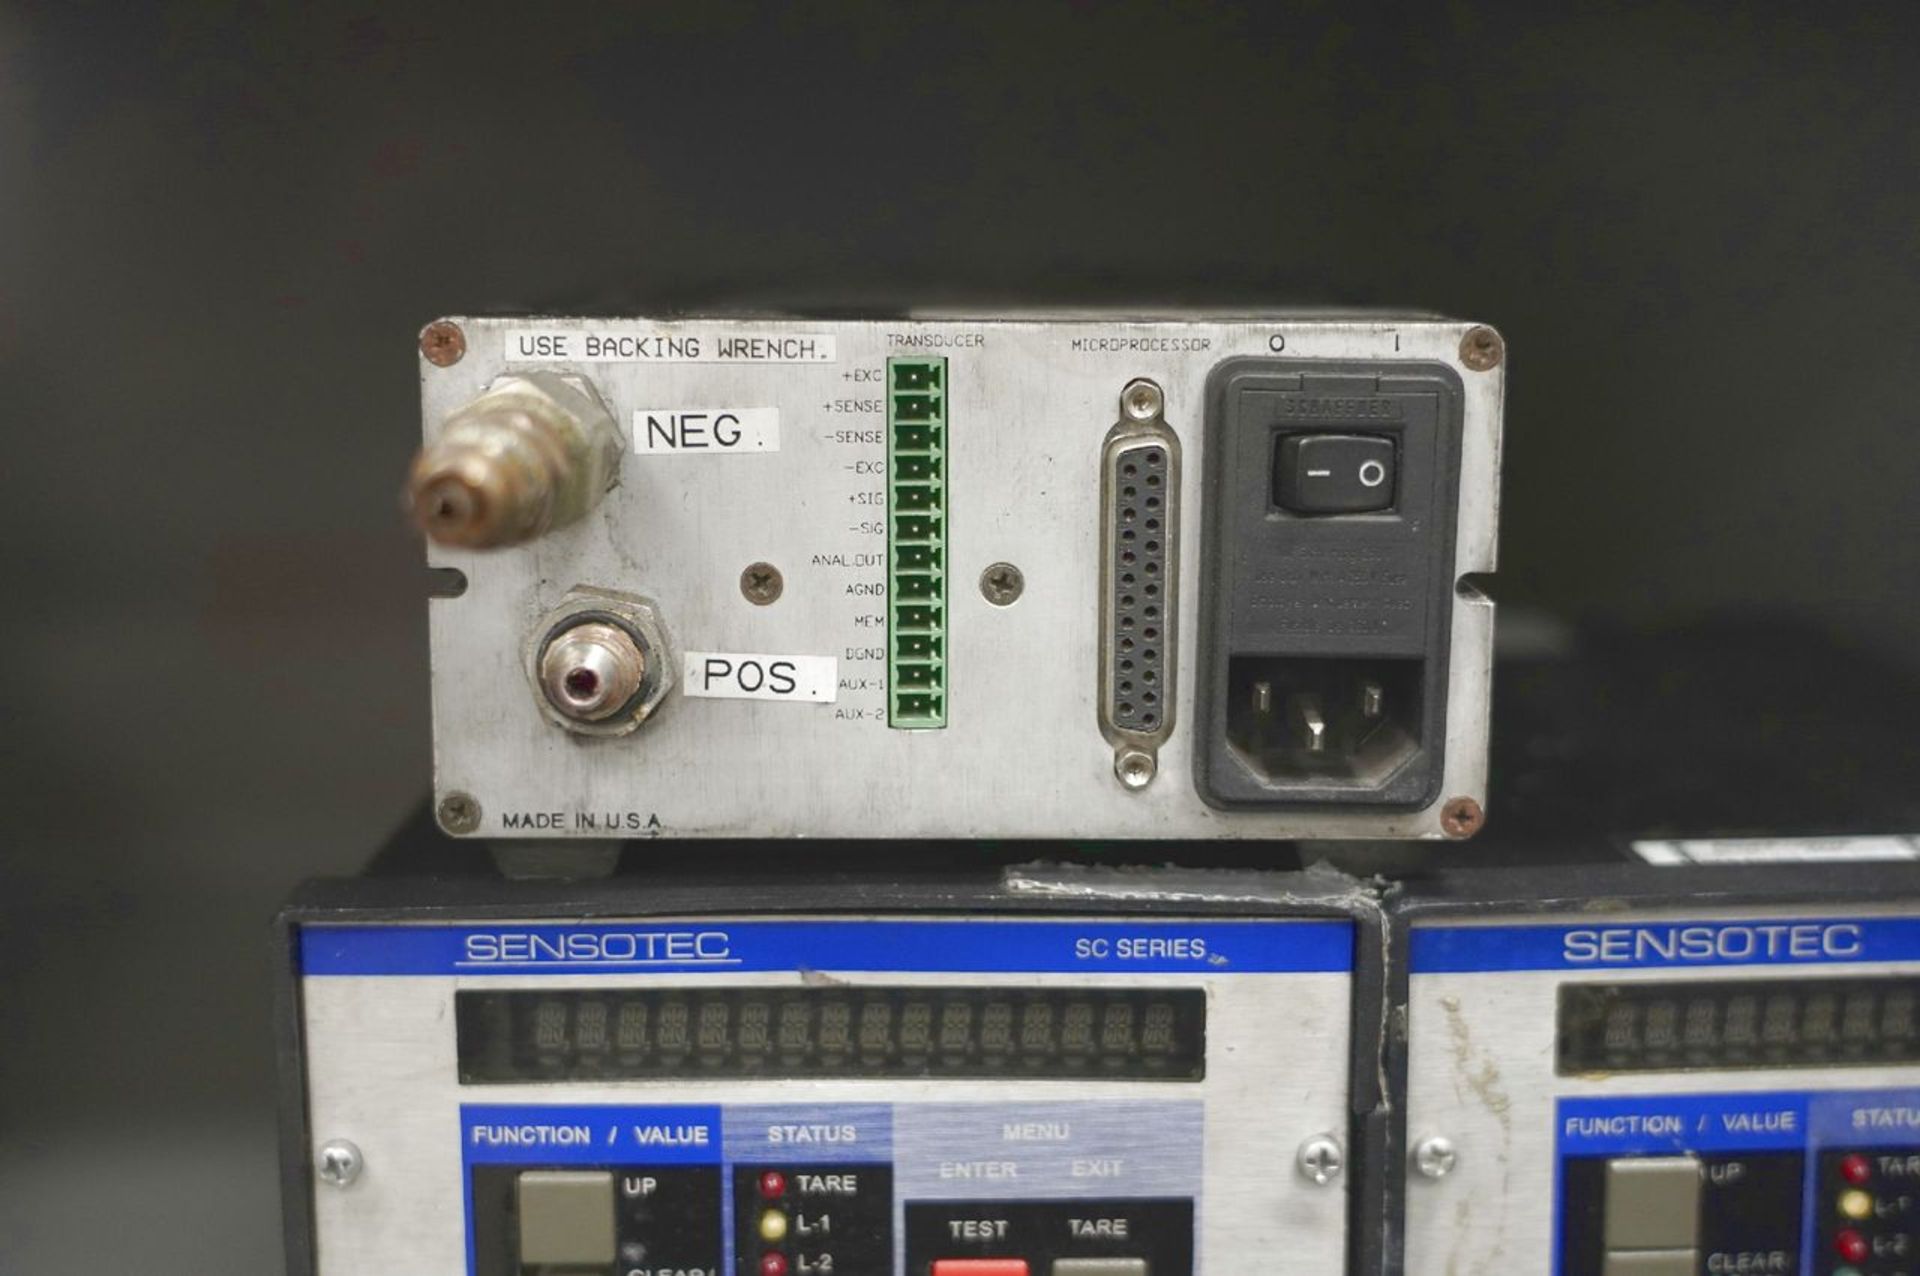 (5) Sonsotec AG300 Transducer Microprocessors, S/N SC Series 890513 (Instrumentation and Electronics - Image 2 of 3